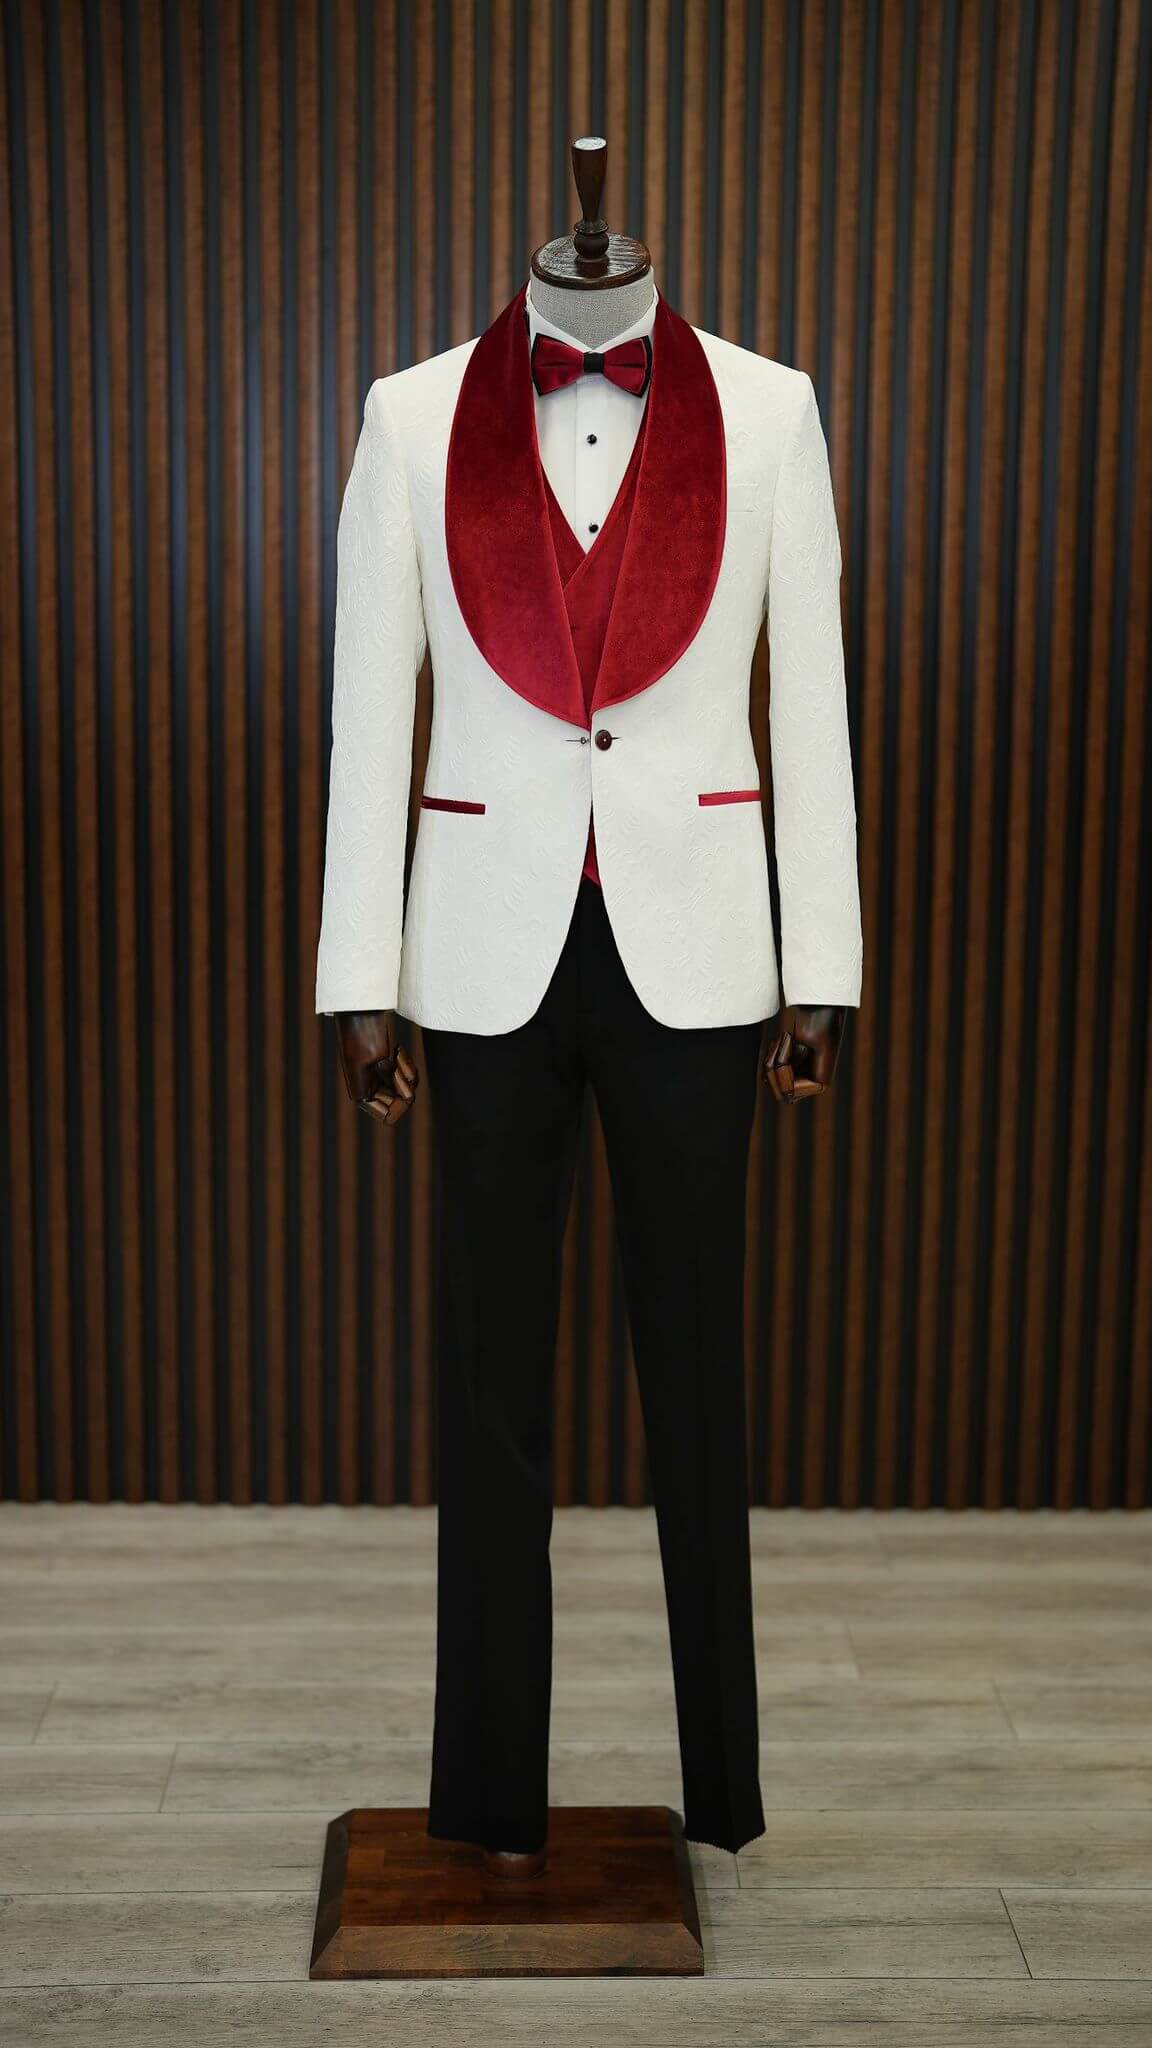 Mababang Red &amp; White Tuxedo Suit